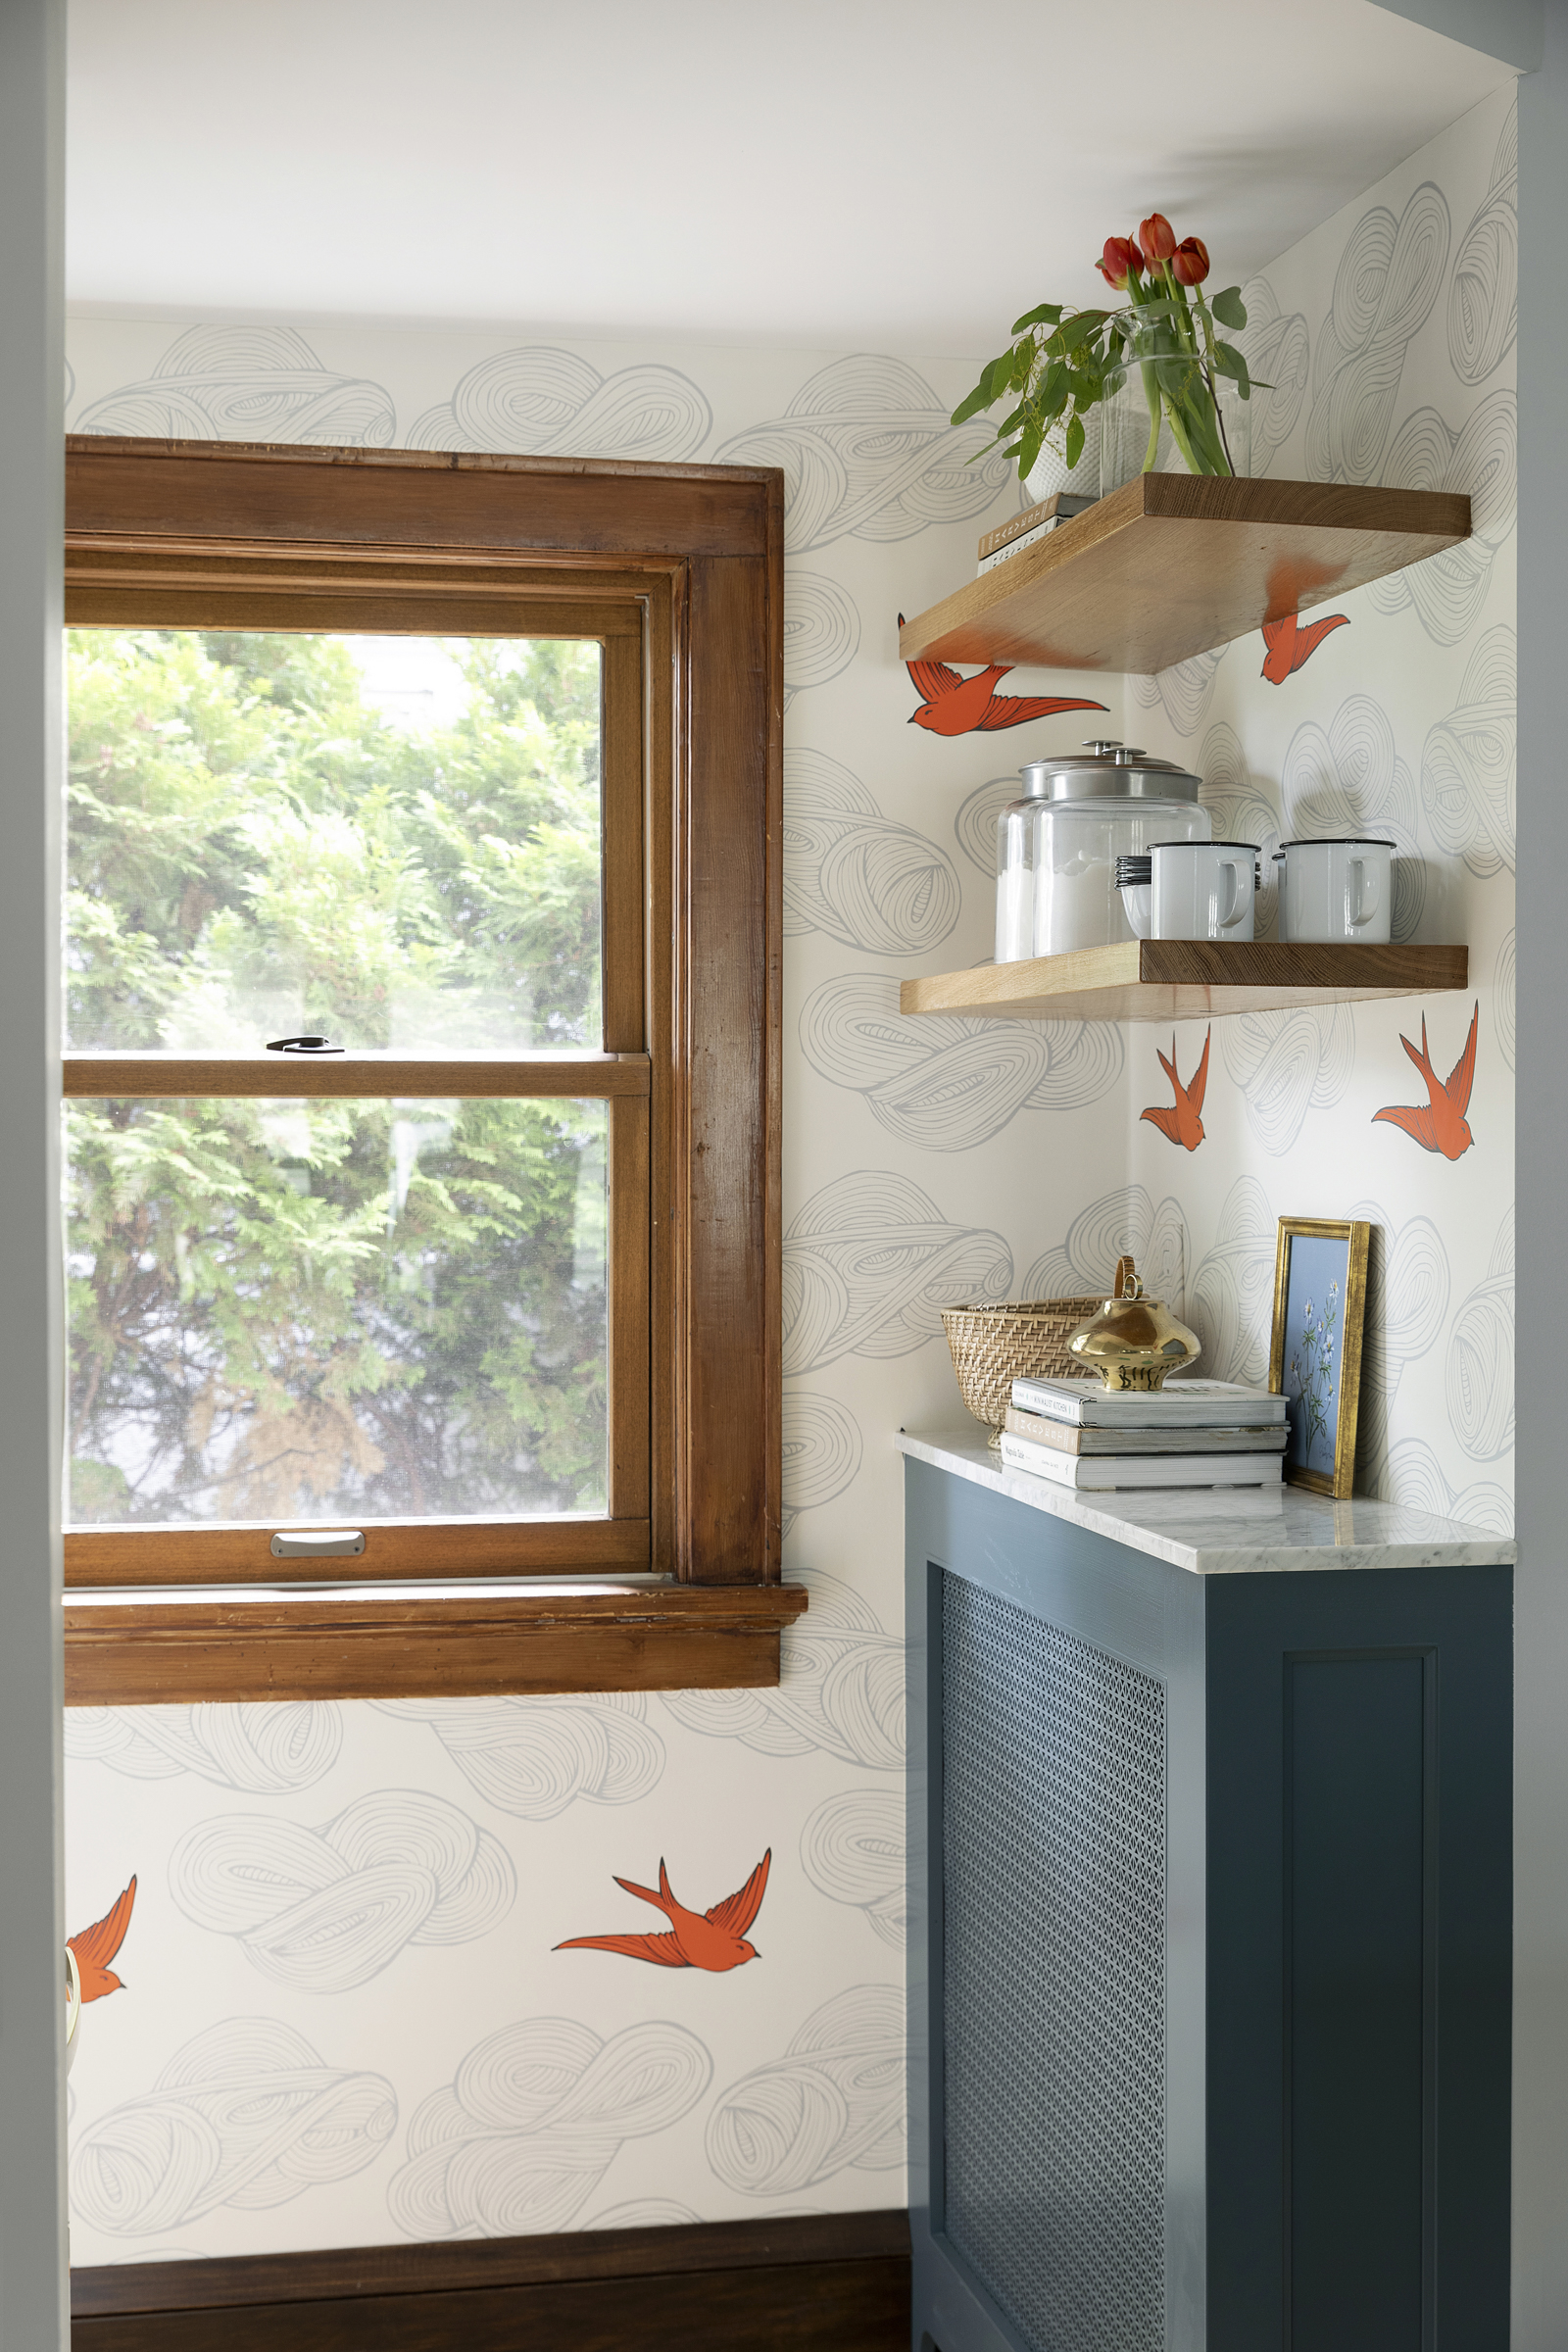 Cozy kitchen nook with custom blue radiator cover, orange bird wallpaper and wood shelving